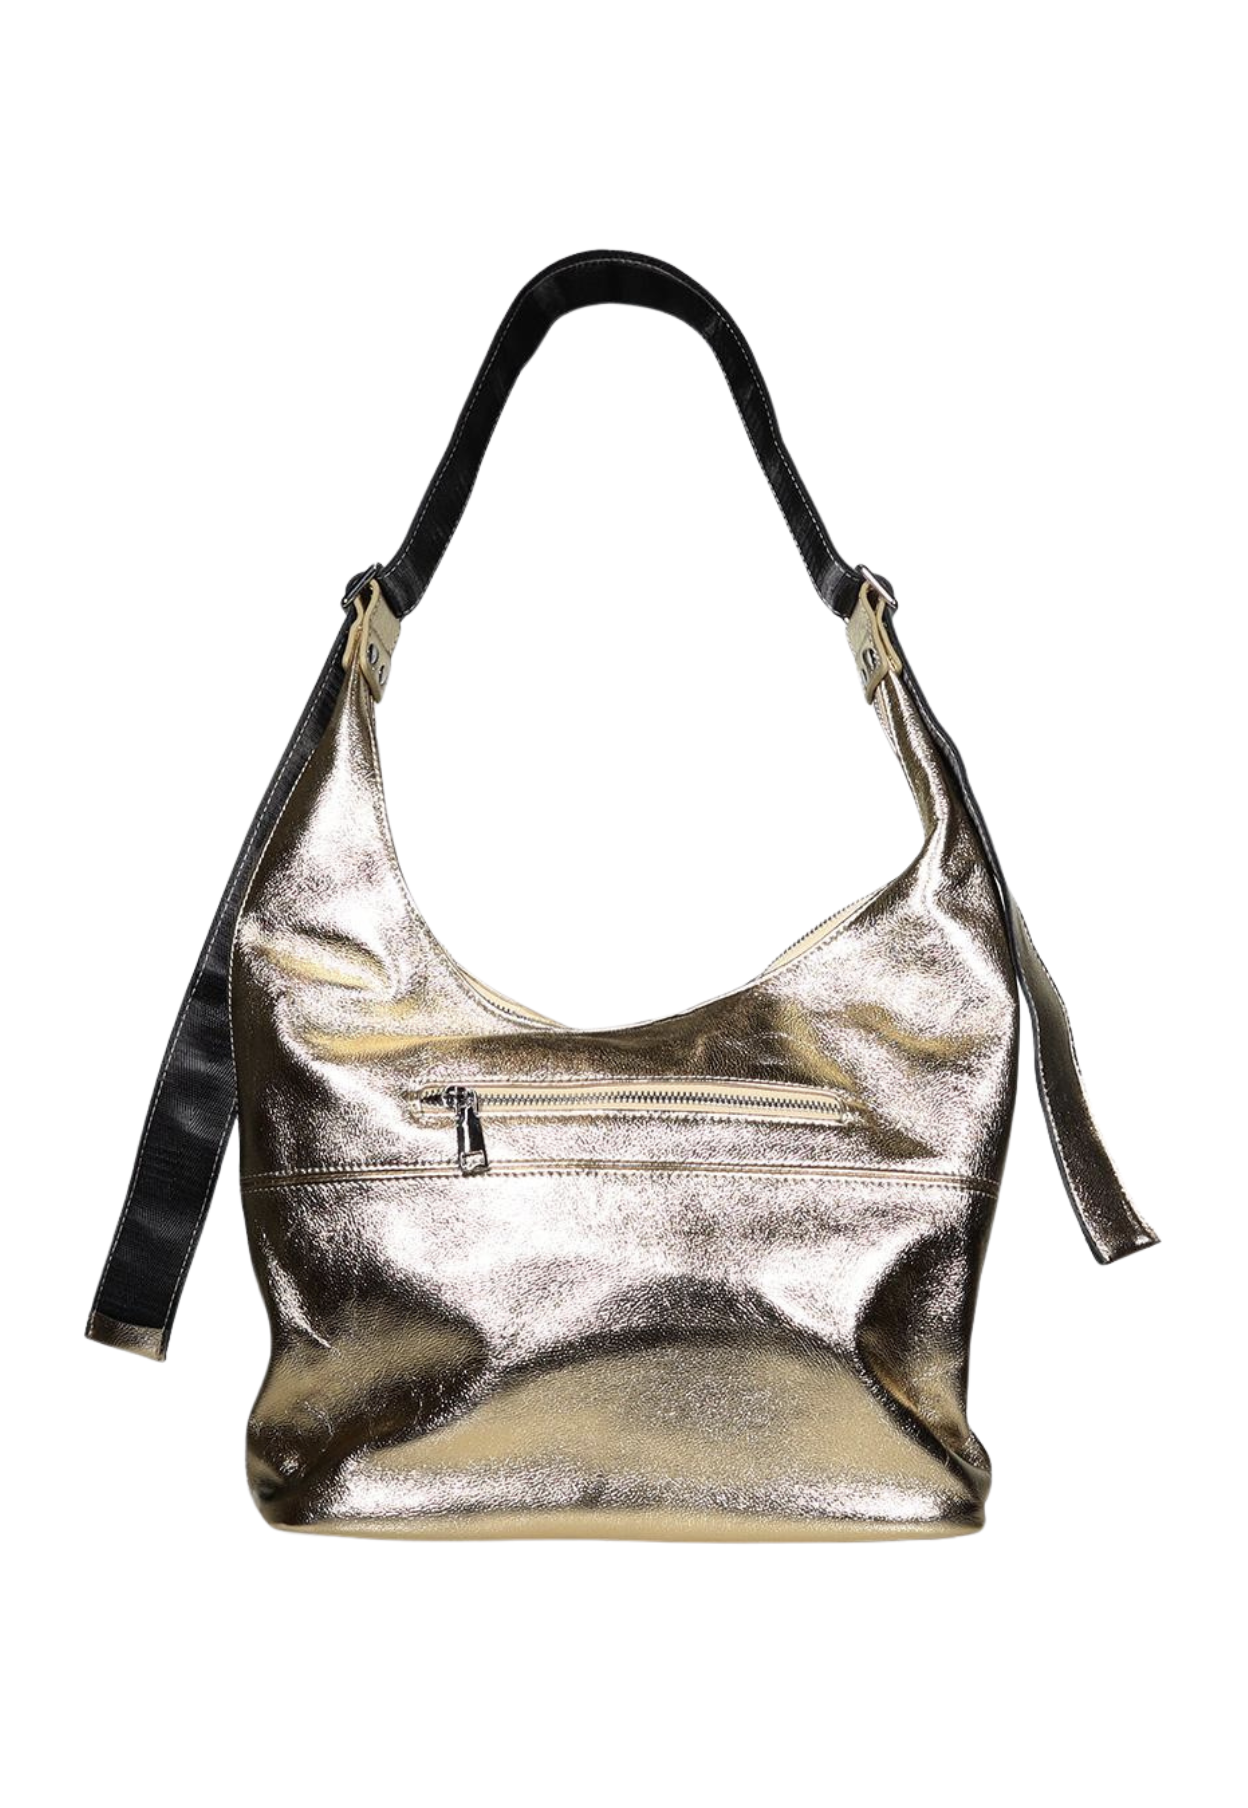 MINX SLOUCH BAG - GOLD - THE VOGUE STORE